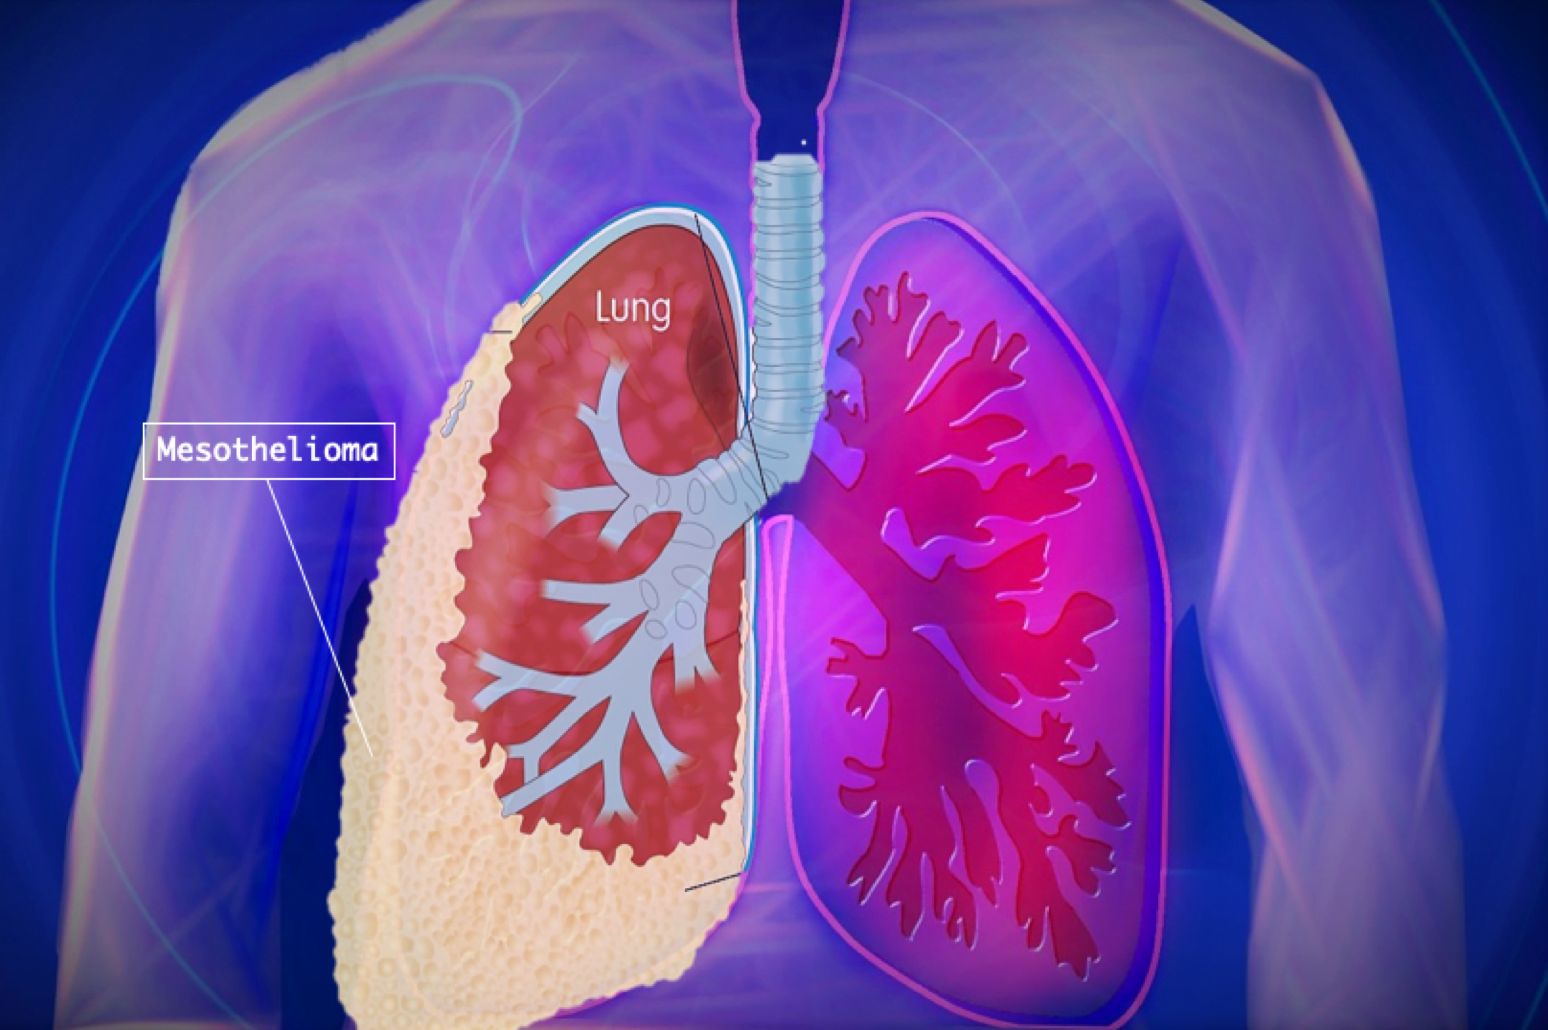 Breakthrough Mesothelioma Treatment: ADI-PEG20 Offers Hope for Increased Survival